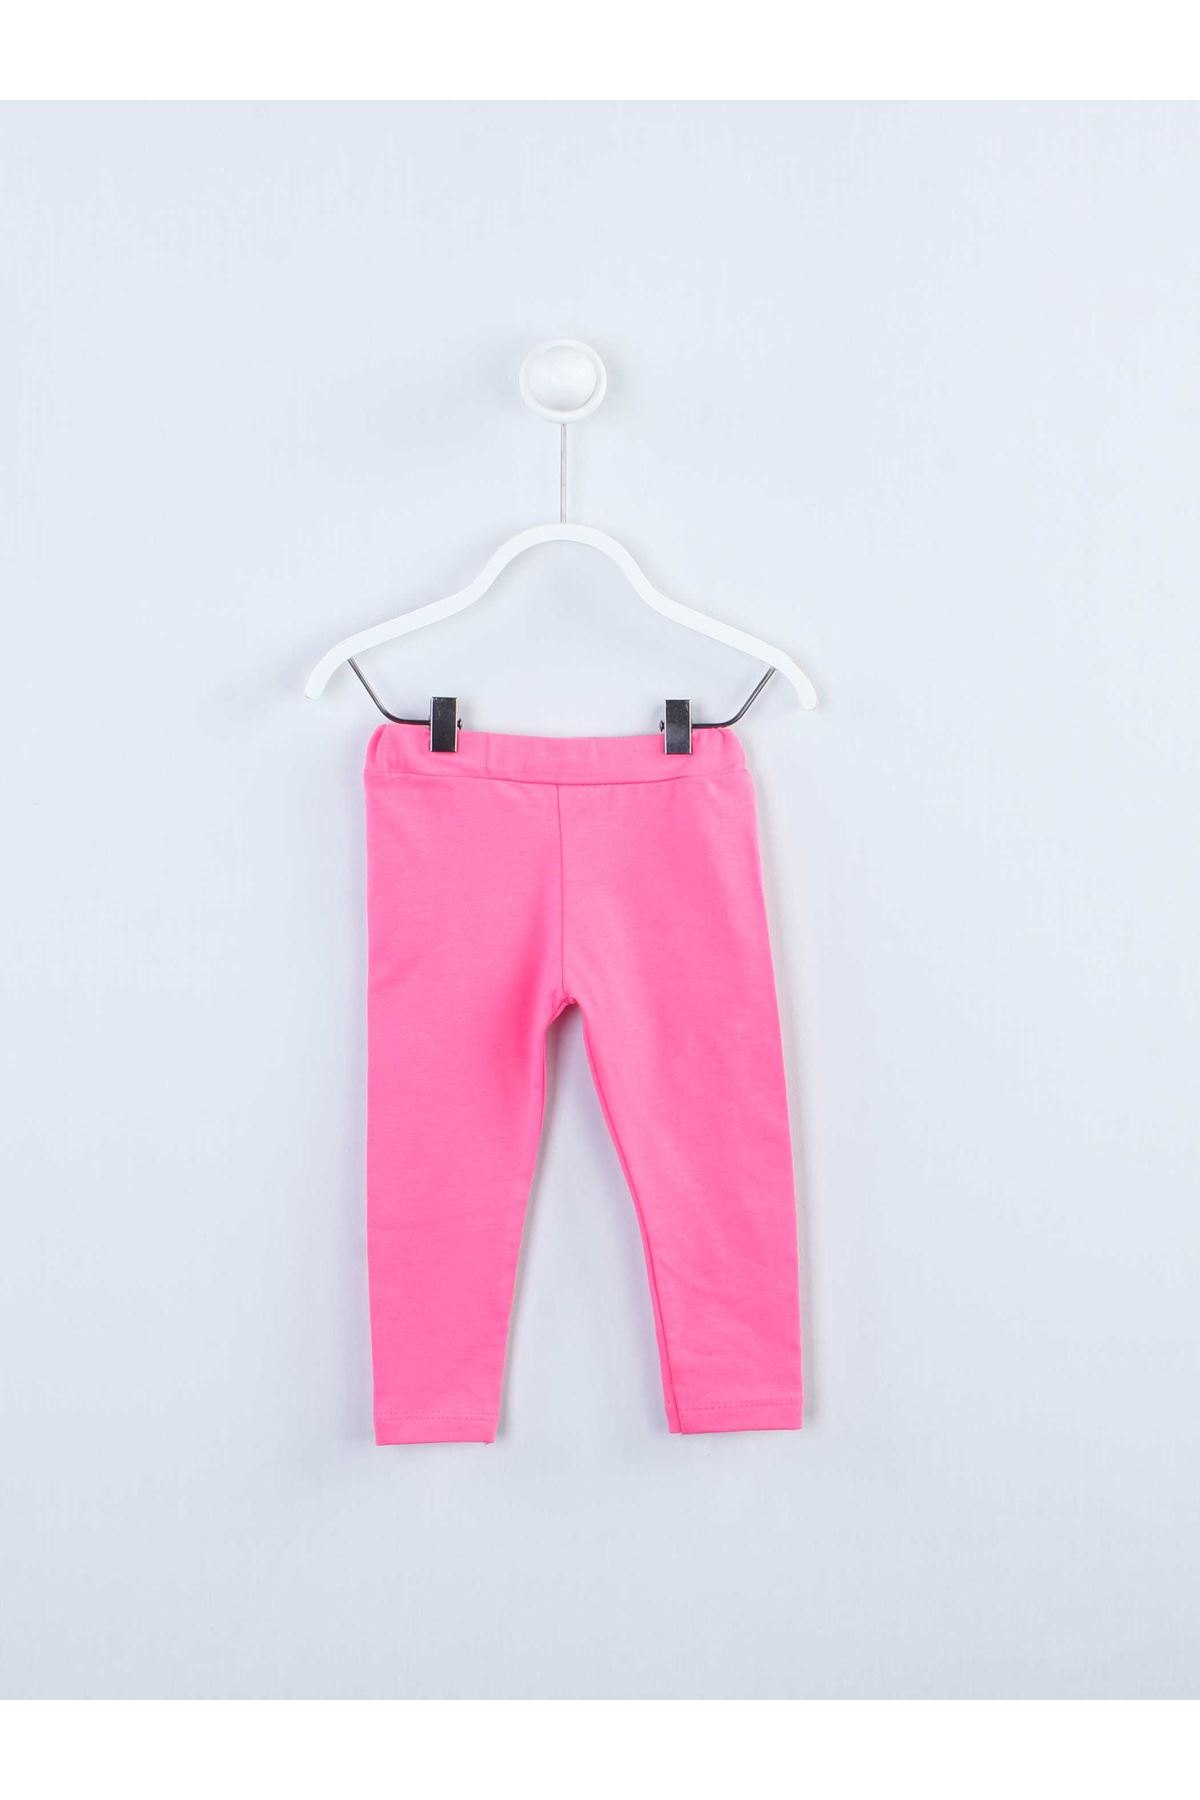 Fuchsia Kids Child girls tights suit top T-shirt tights cotton daily season wear outfit models